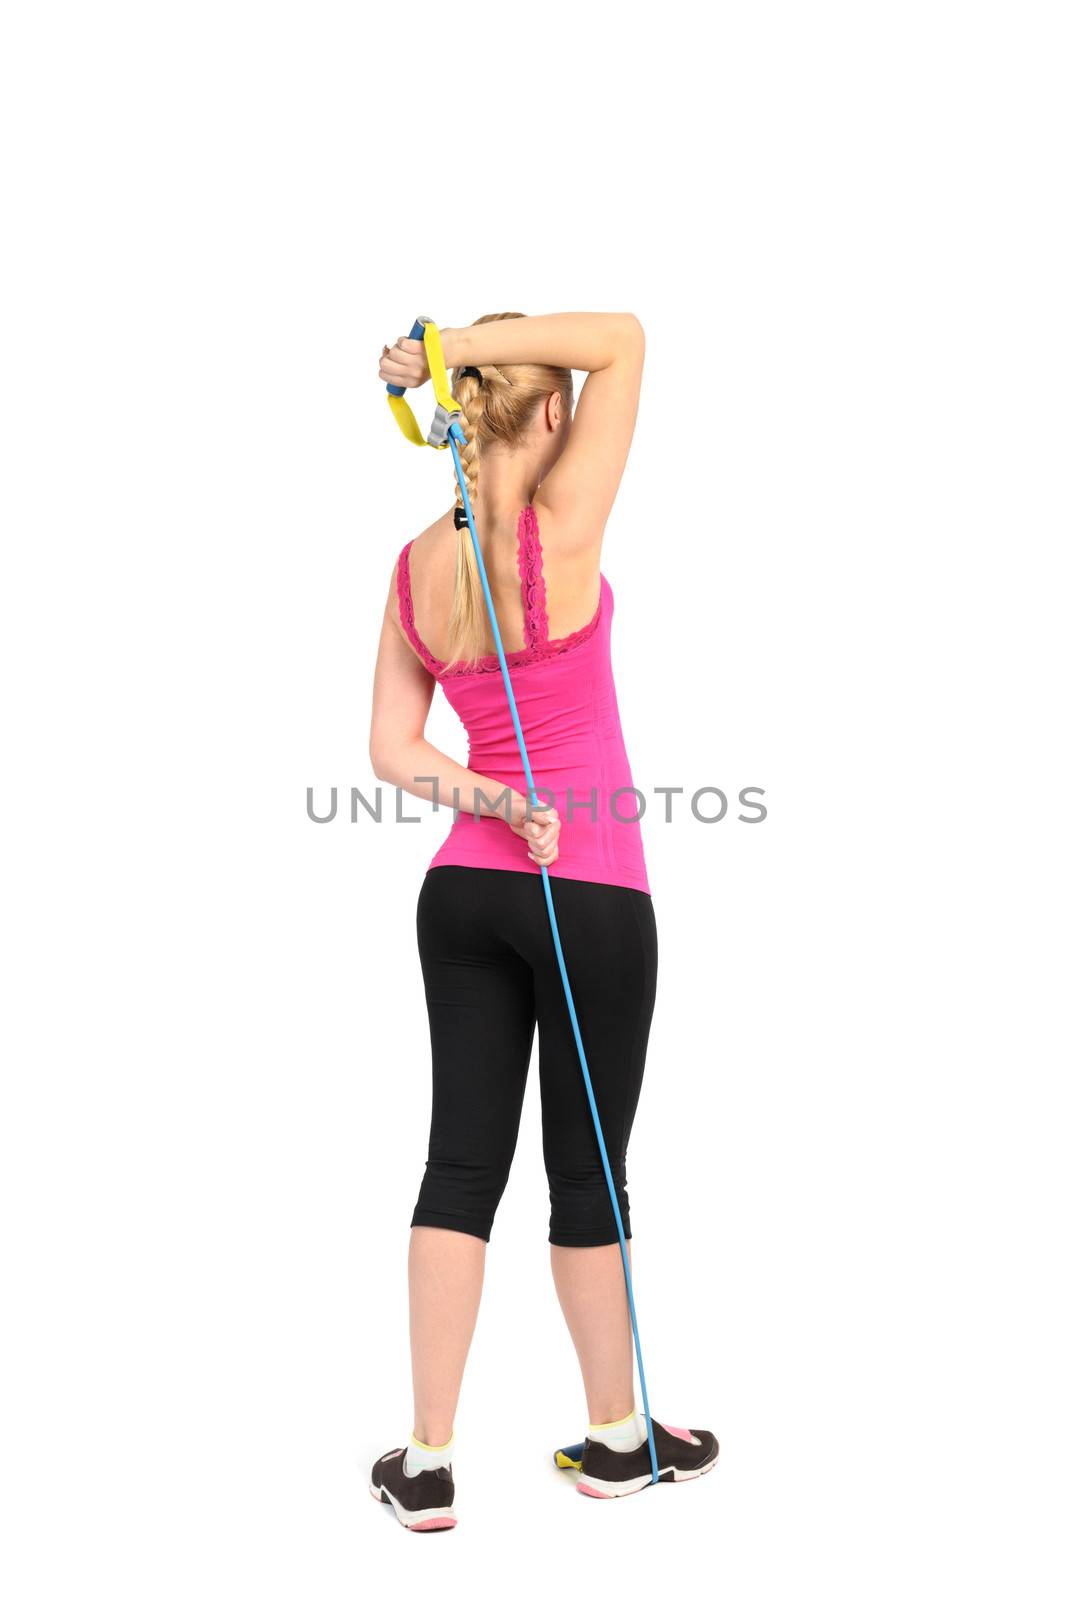 Female triceps extention exercise using rubber resistance band by starush